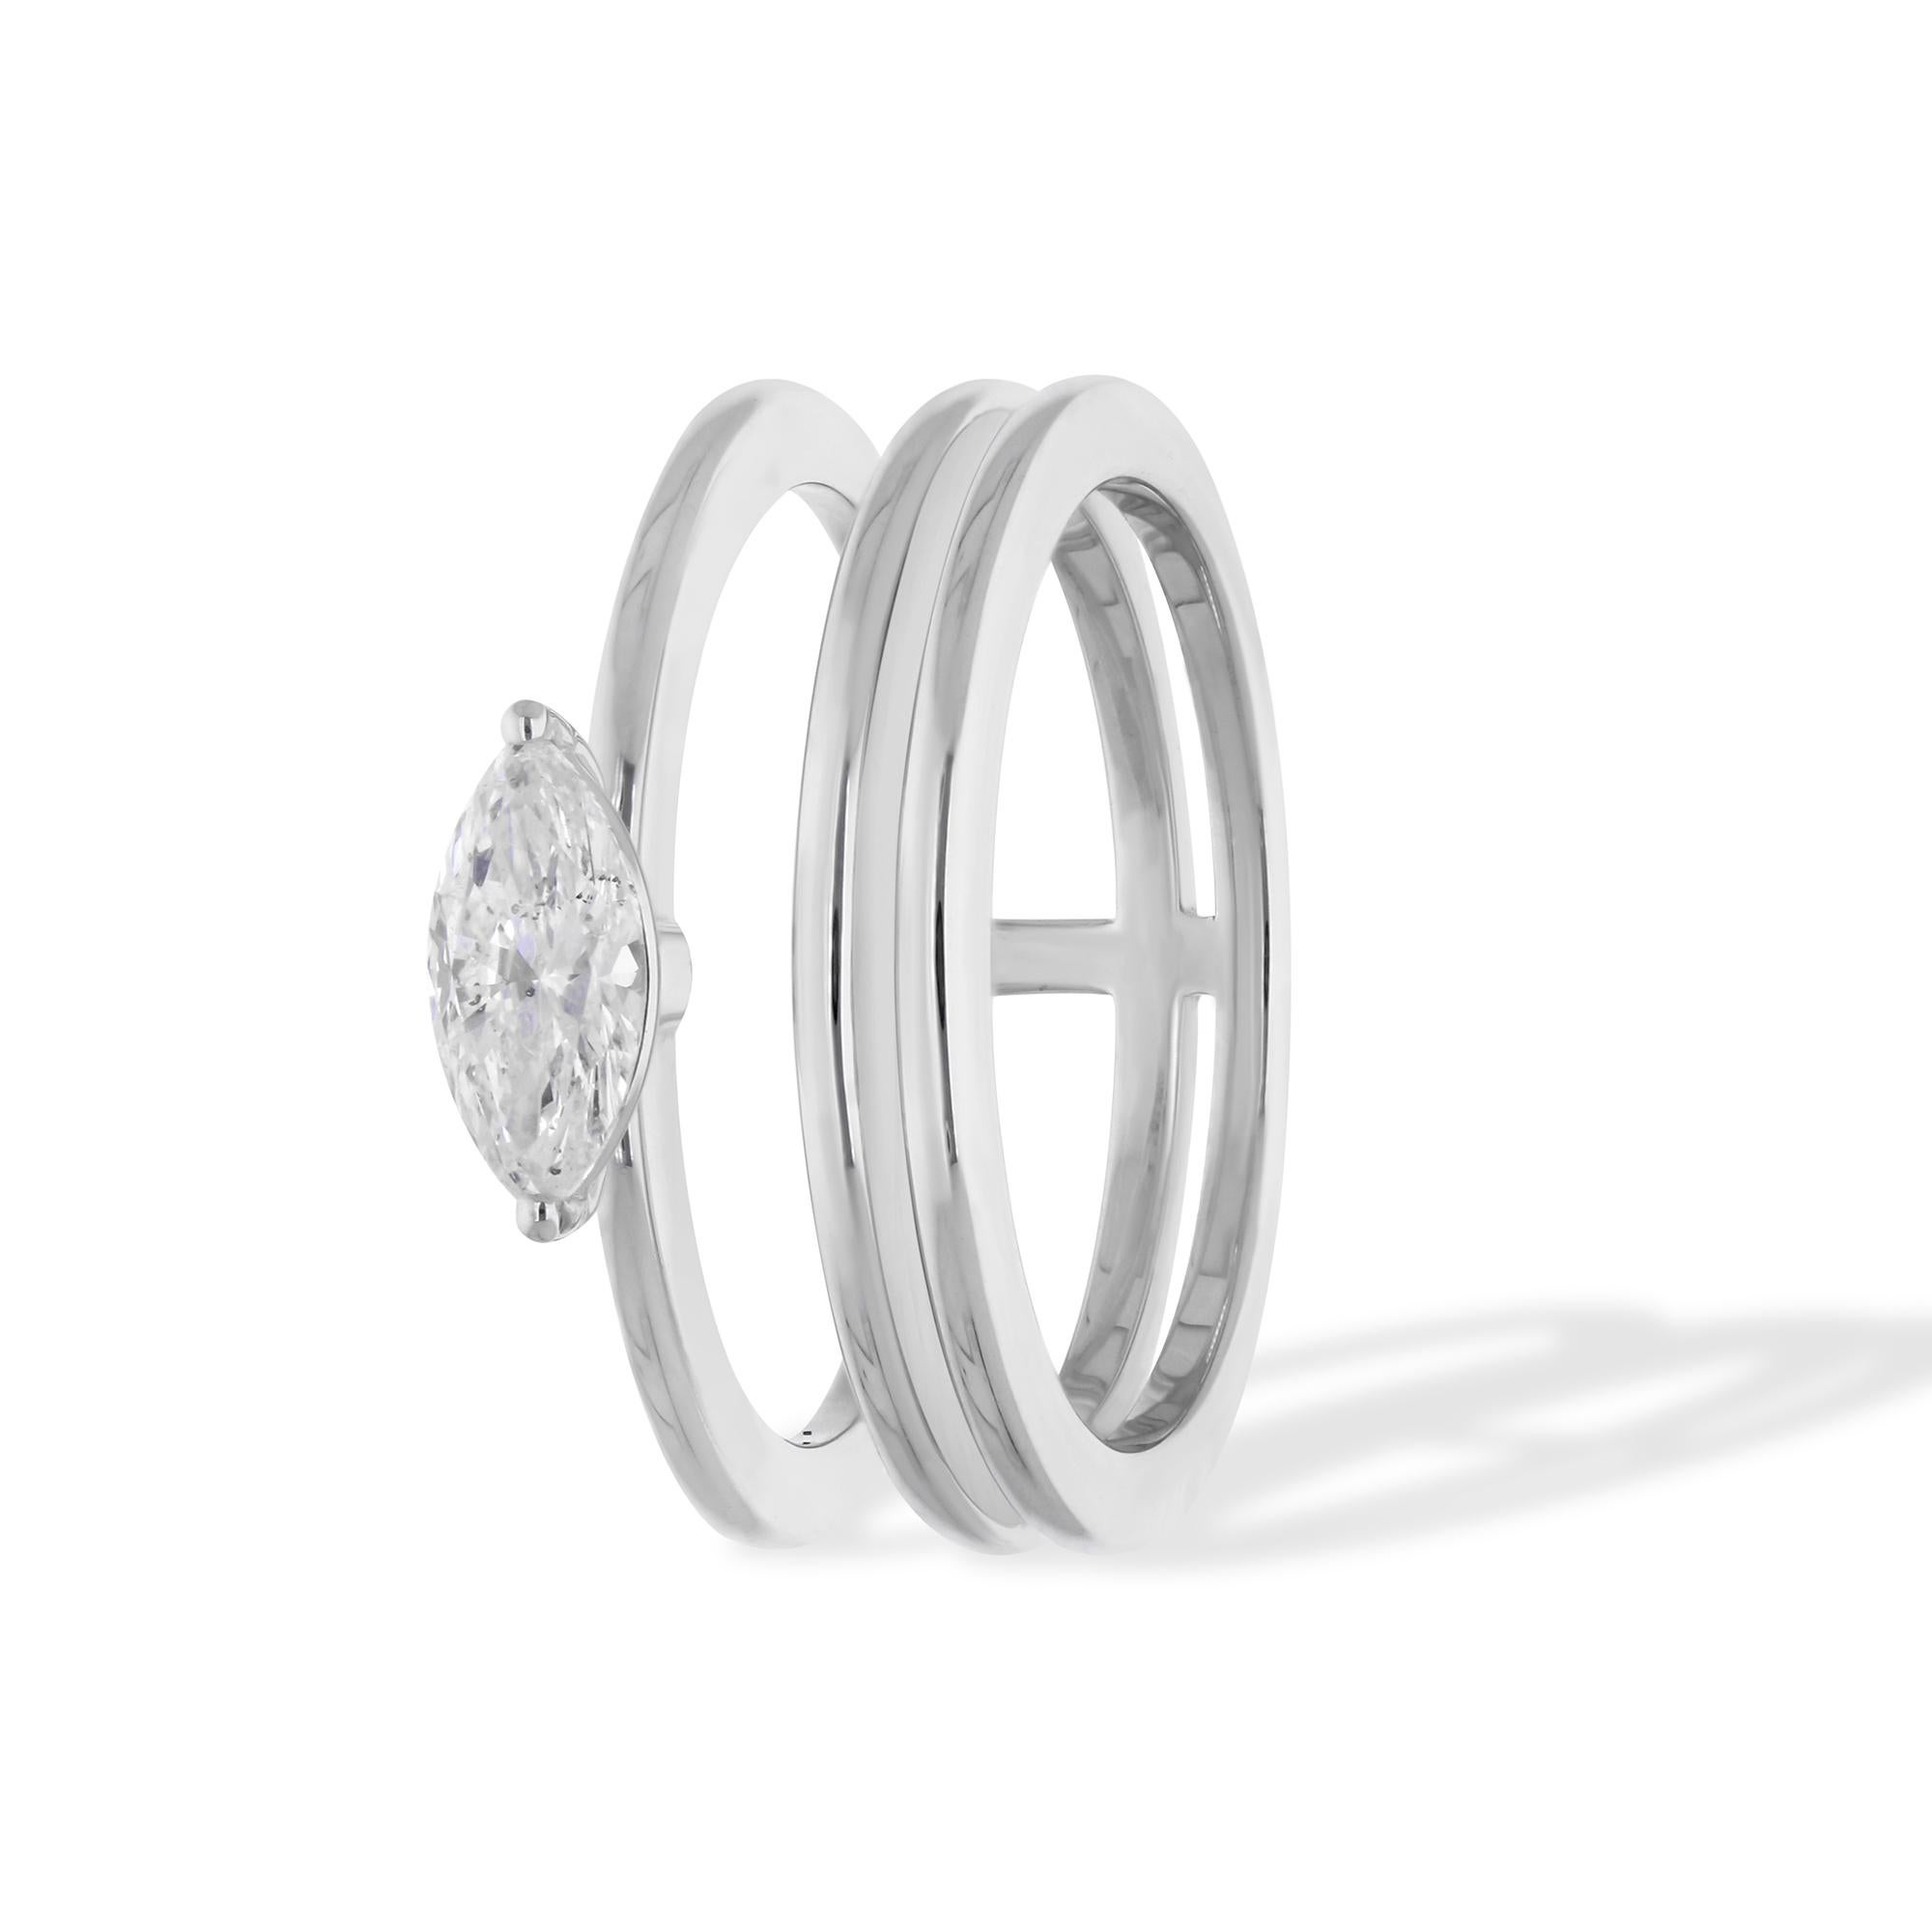 Elevate your style with timeless sophistication with this exquisite 0.47 Carat Solitaire Marquise Diamond Band Ring, meticulously crafted in radiant 14 karat white gold. A symbol of refined elegance, this ring features a stunning marquise-cut